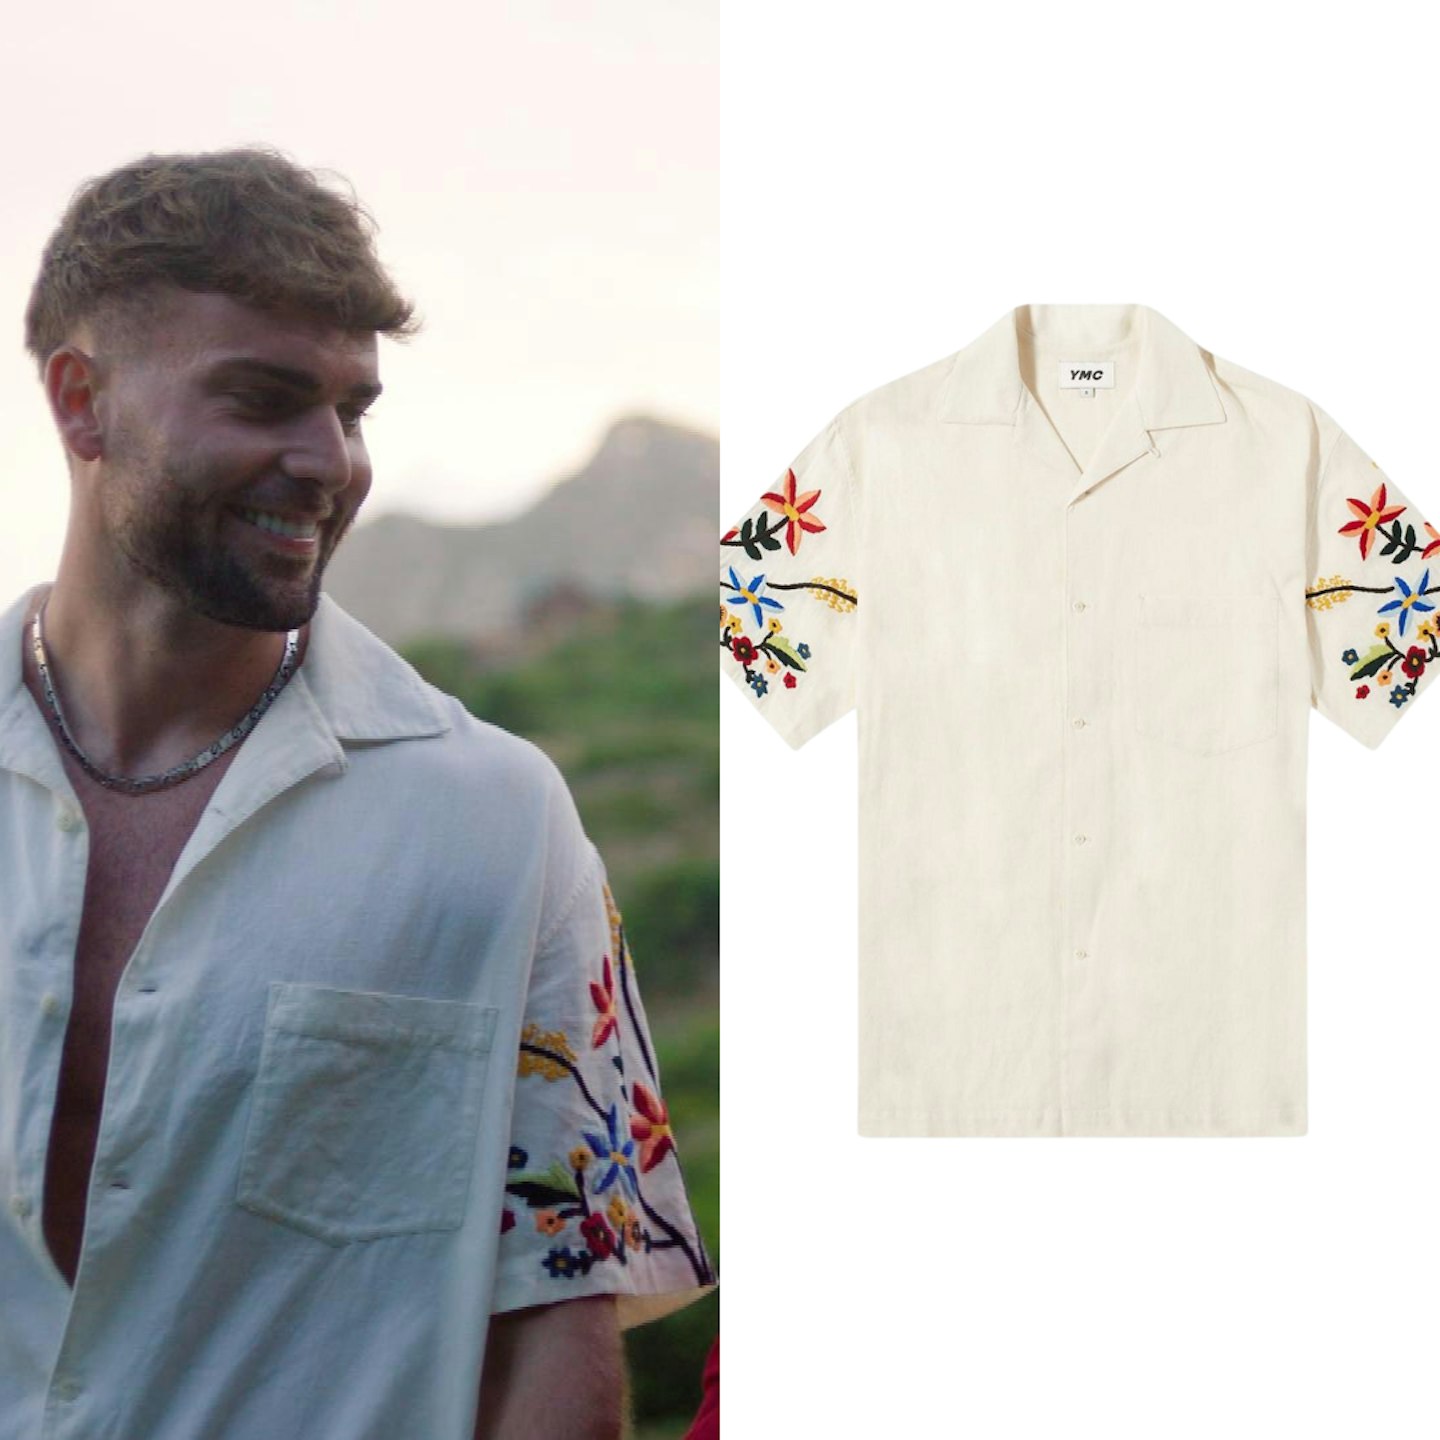 Tom's Floral Embroidered Shirt